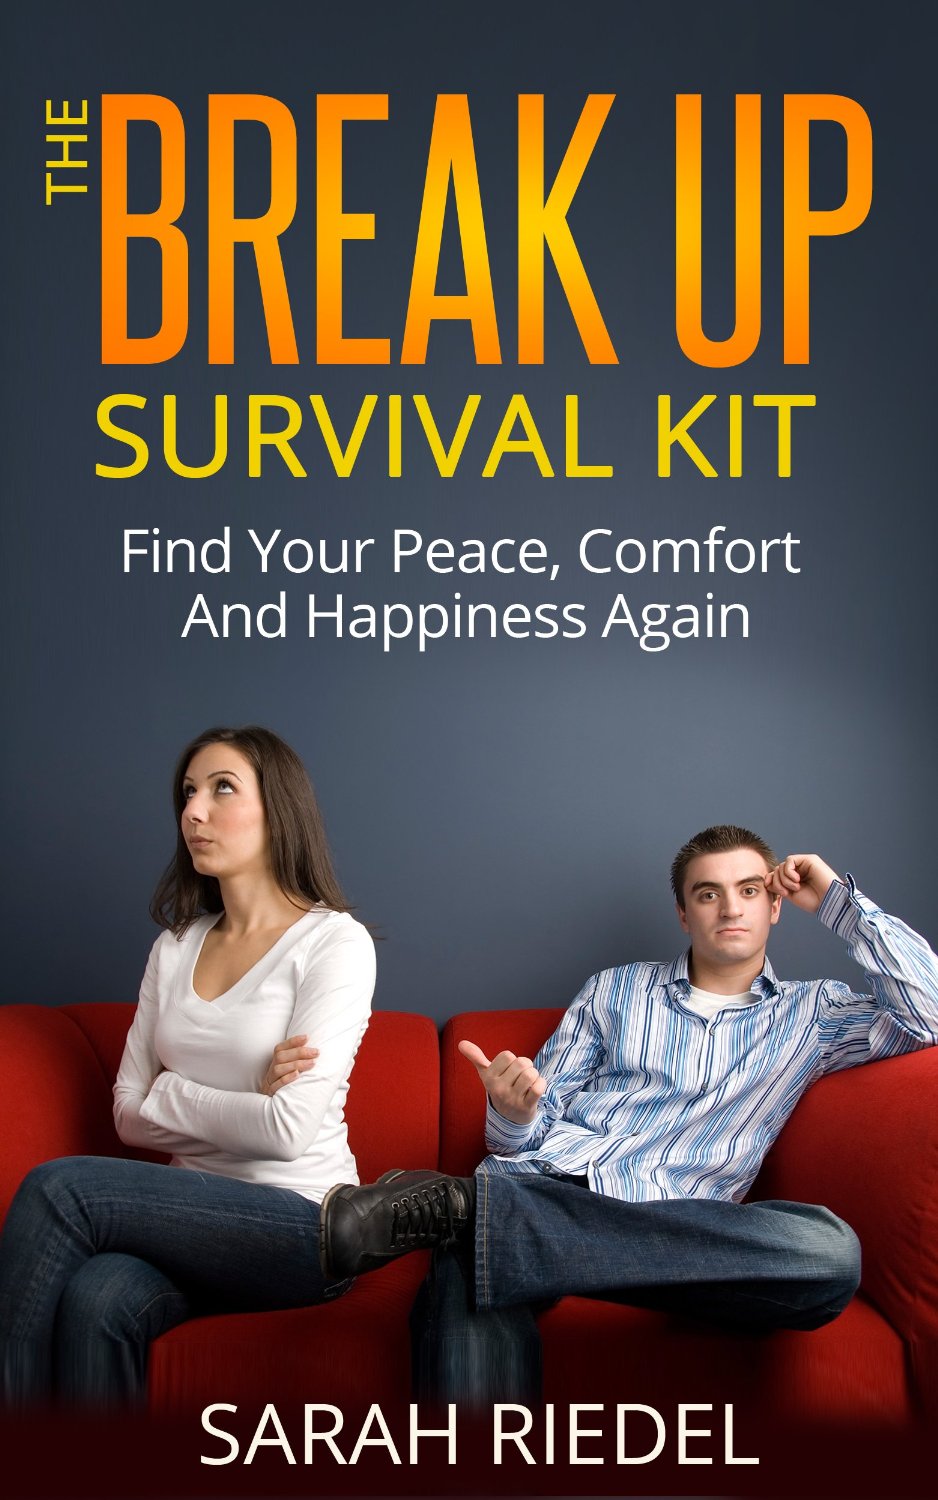 The Break up Survival Kit – Find Peace, Comfort and Happiness Again